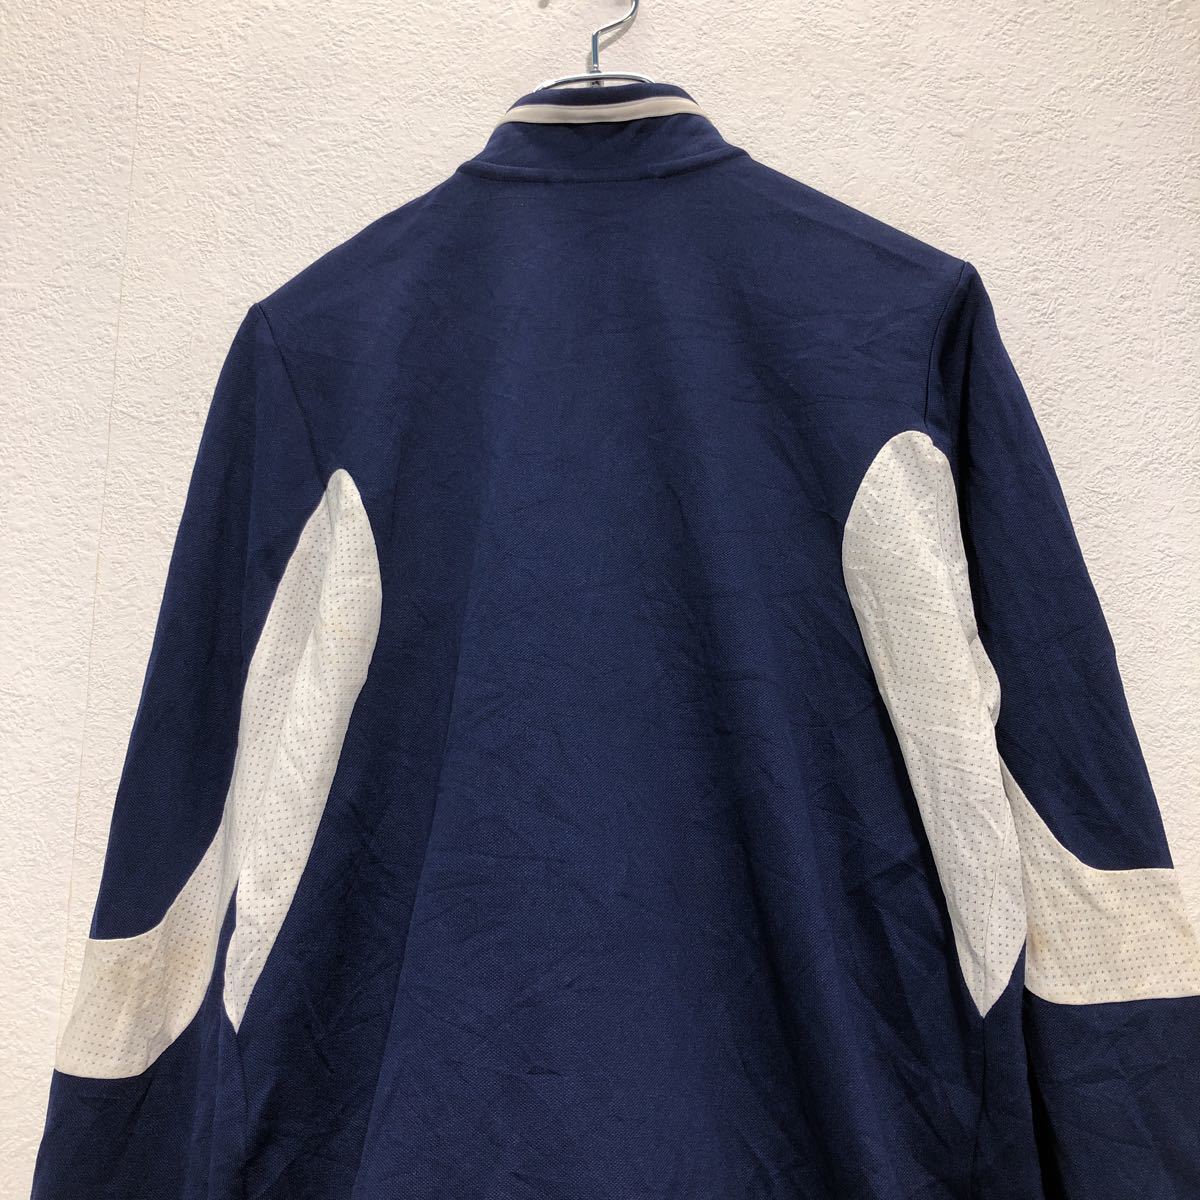 adidas jersey 160 navy white Adidas Kids mesh Zip up pocket sport old clothes . America buying up a505-5165